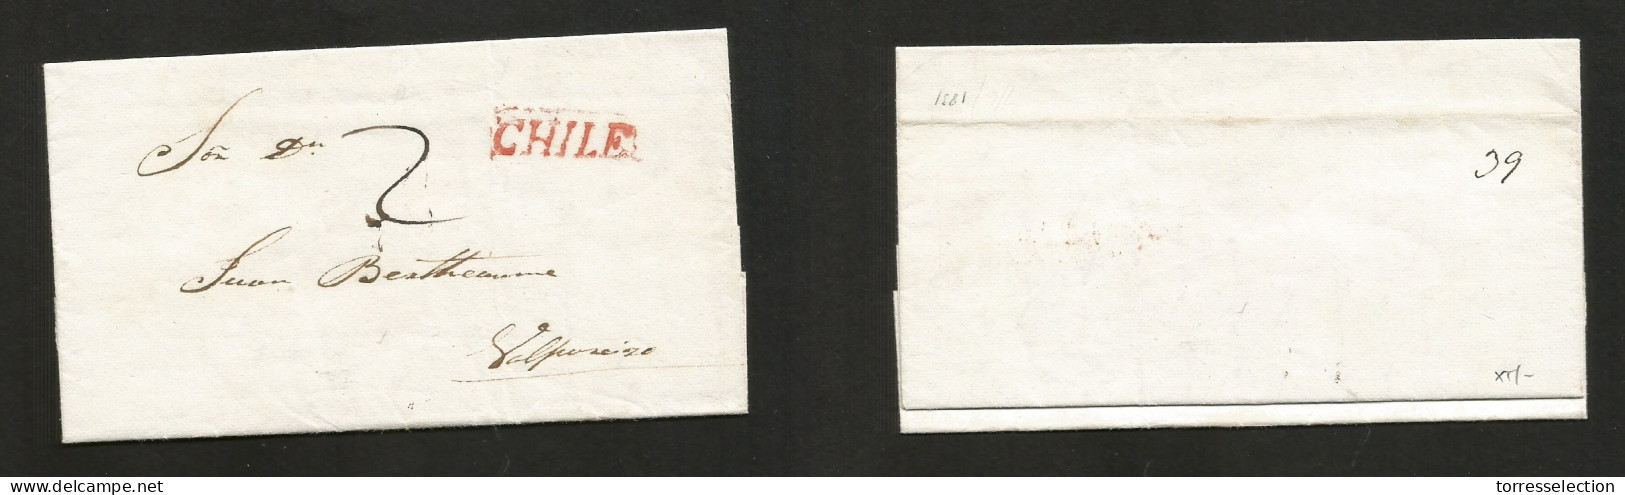 CHILE. 1831 (7 June) Stgo - Valp. EL With Text, Stline Red CHILE + "2" Mns Charge. VF. SALE. - Chili